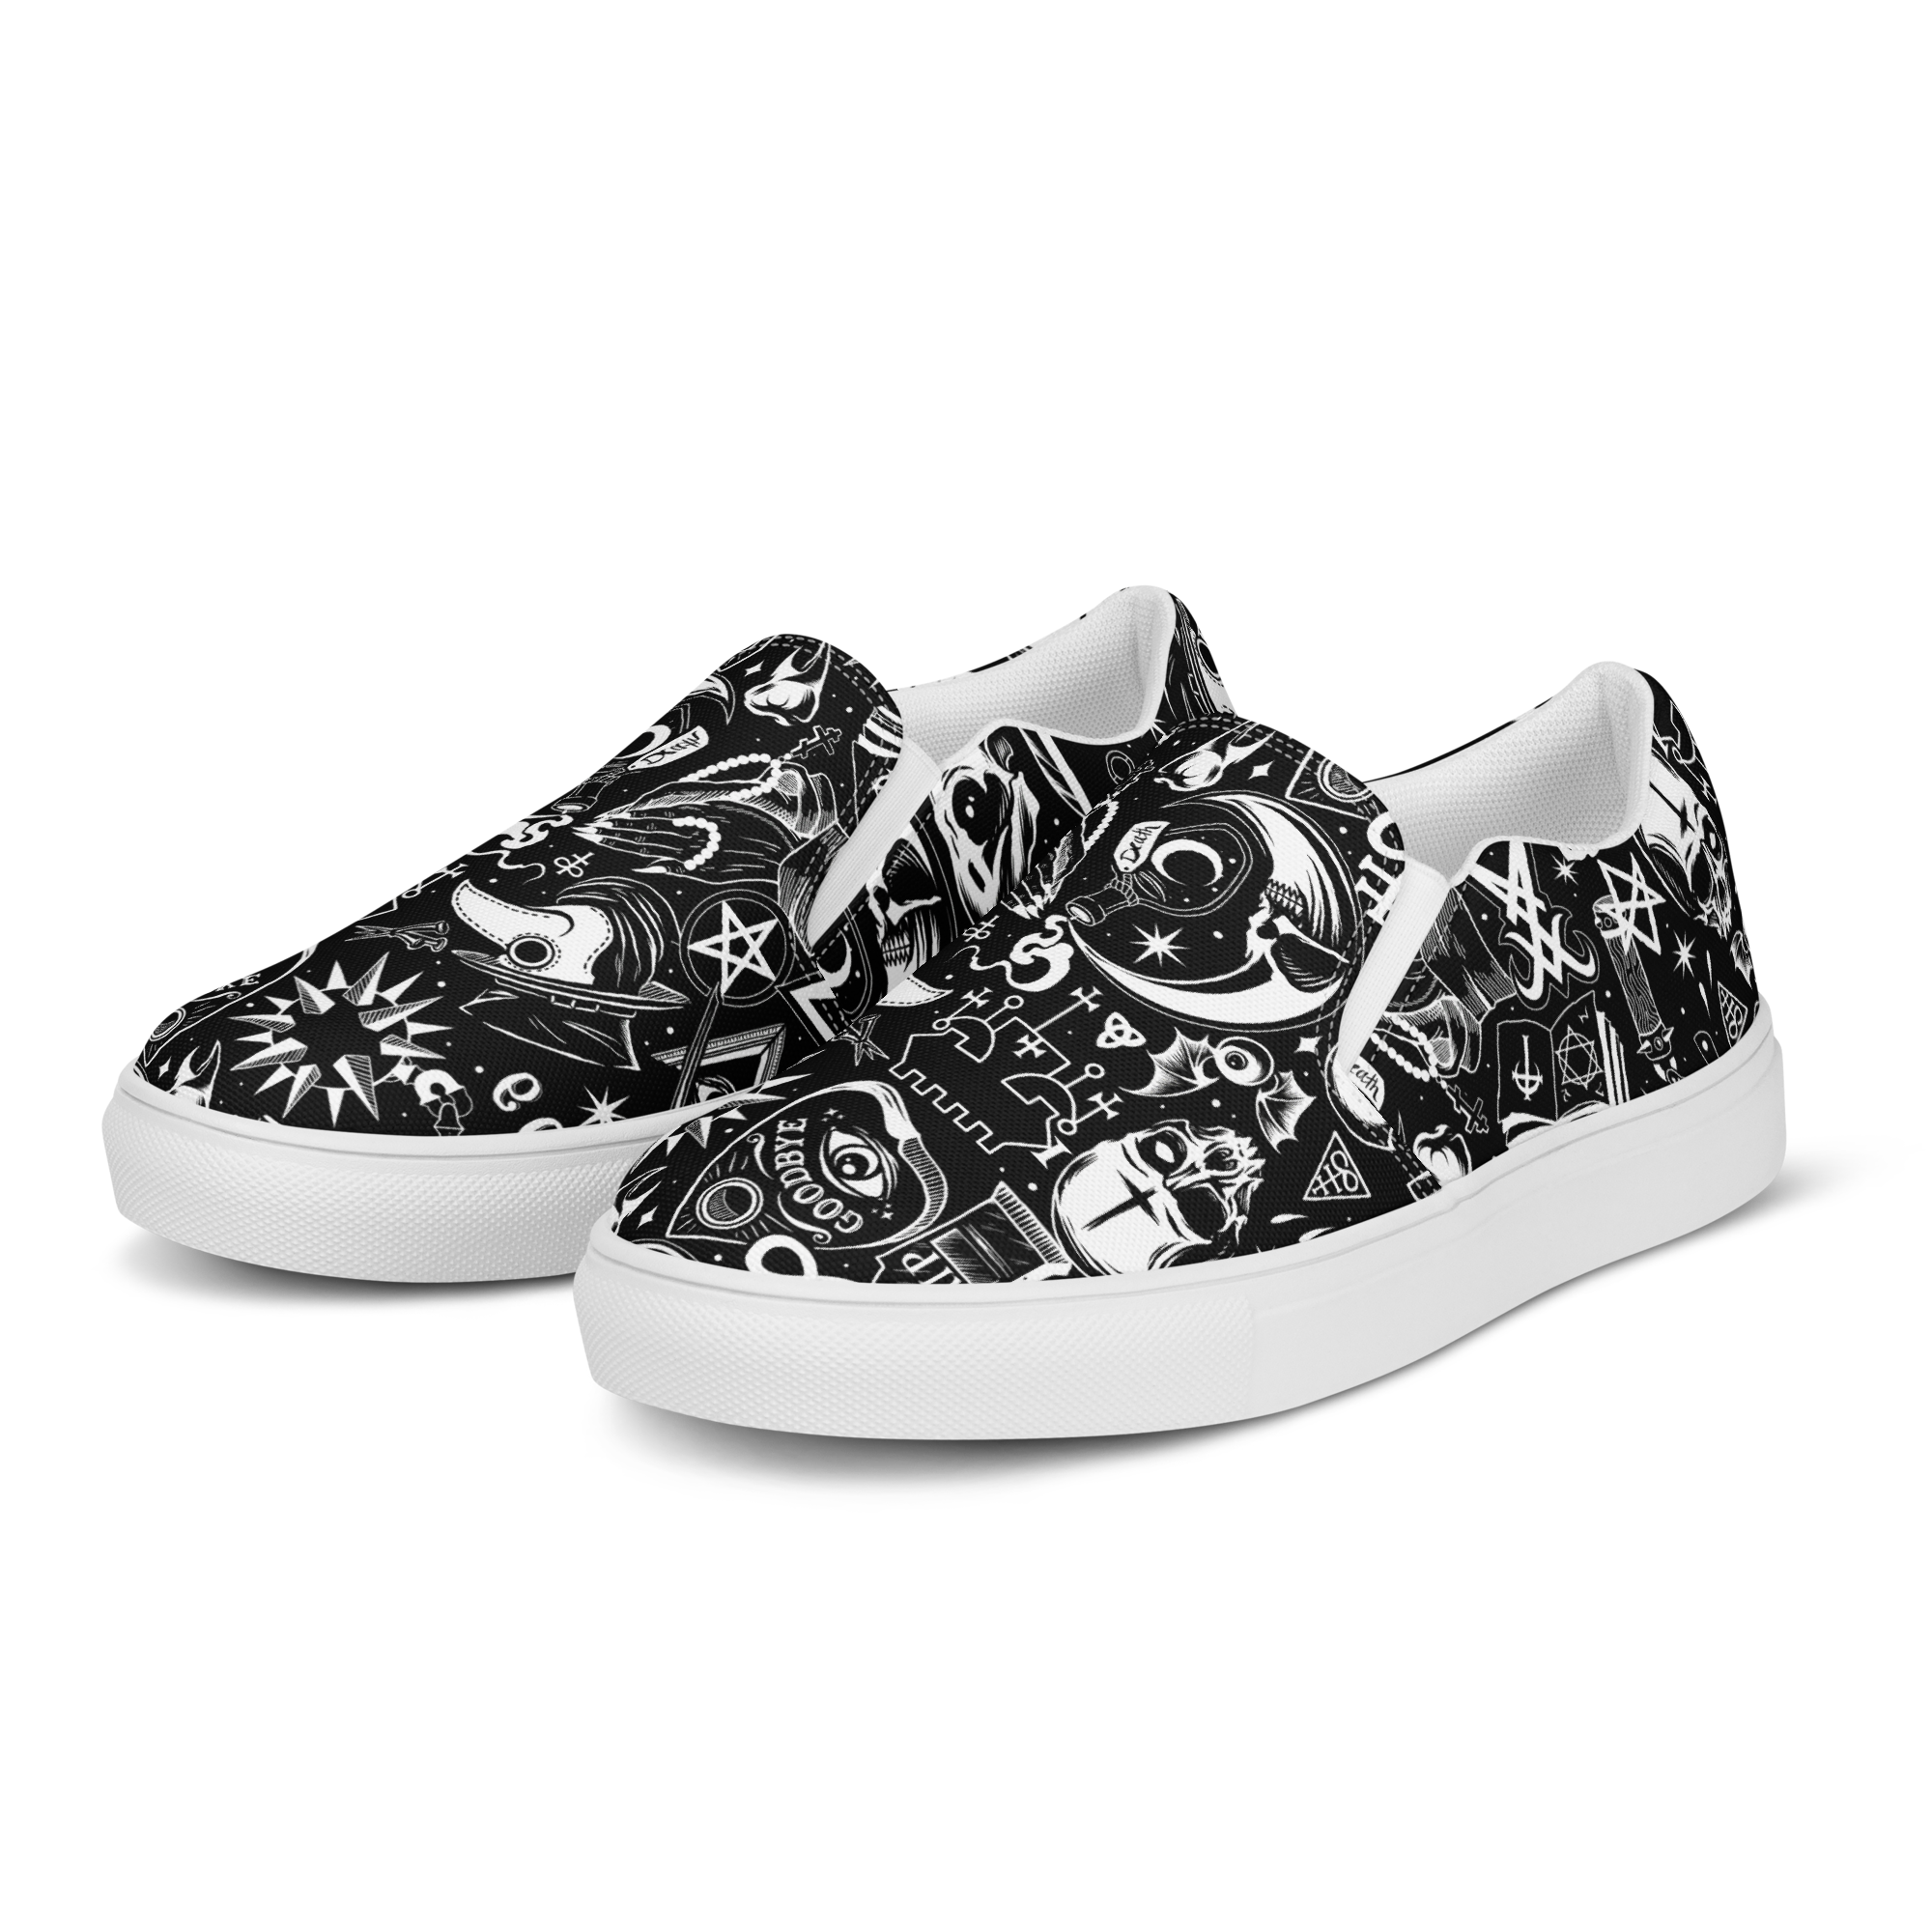 The Satanist slip-on canvas shoes